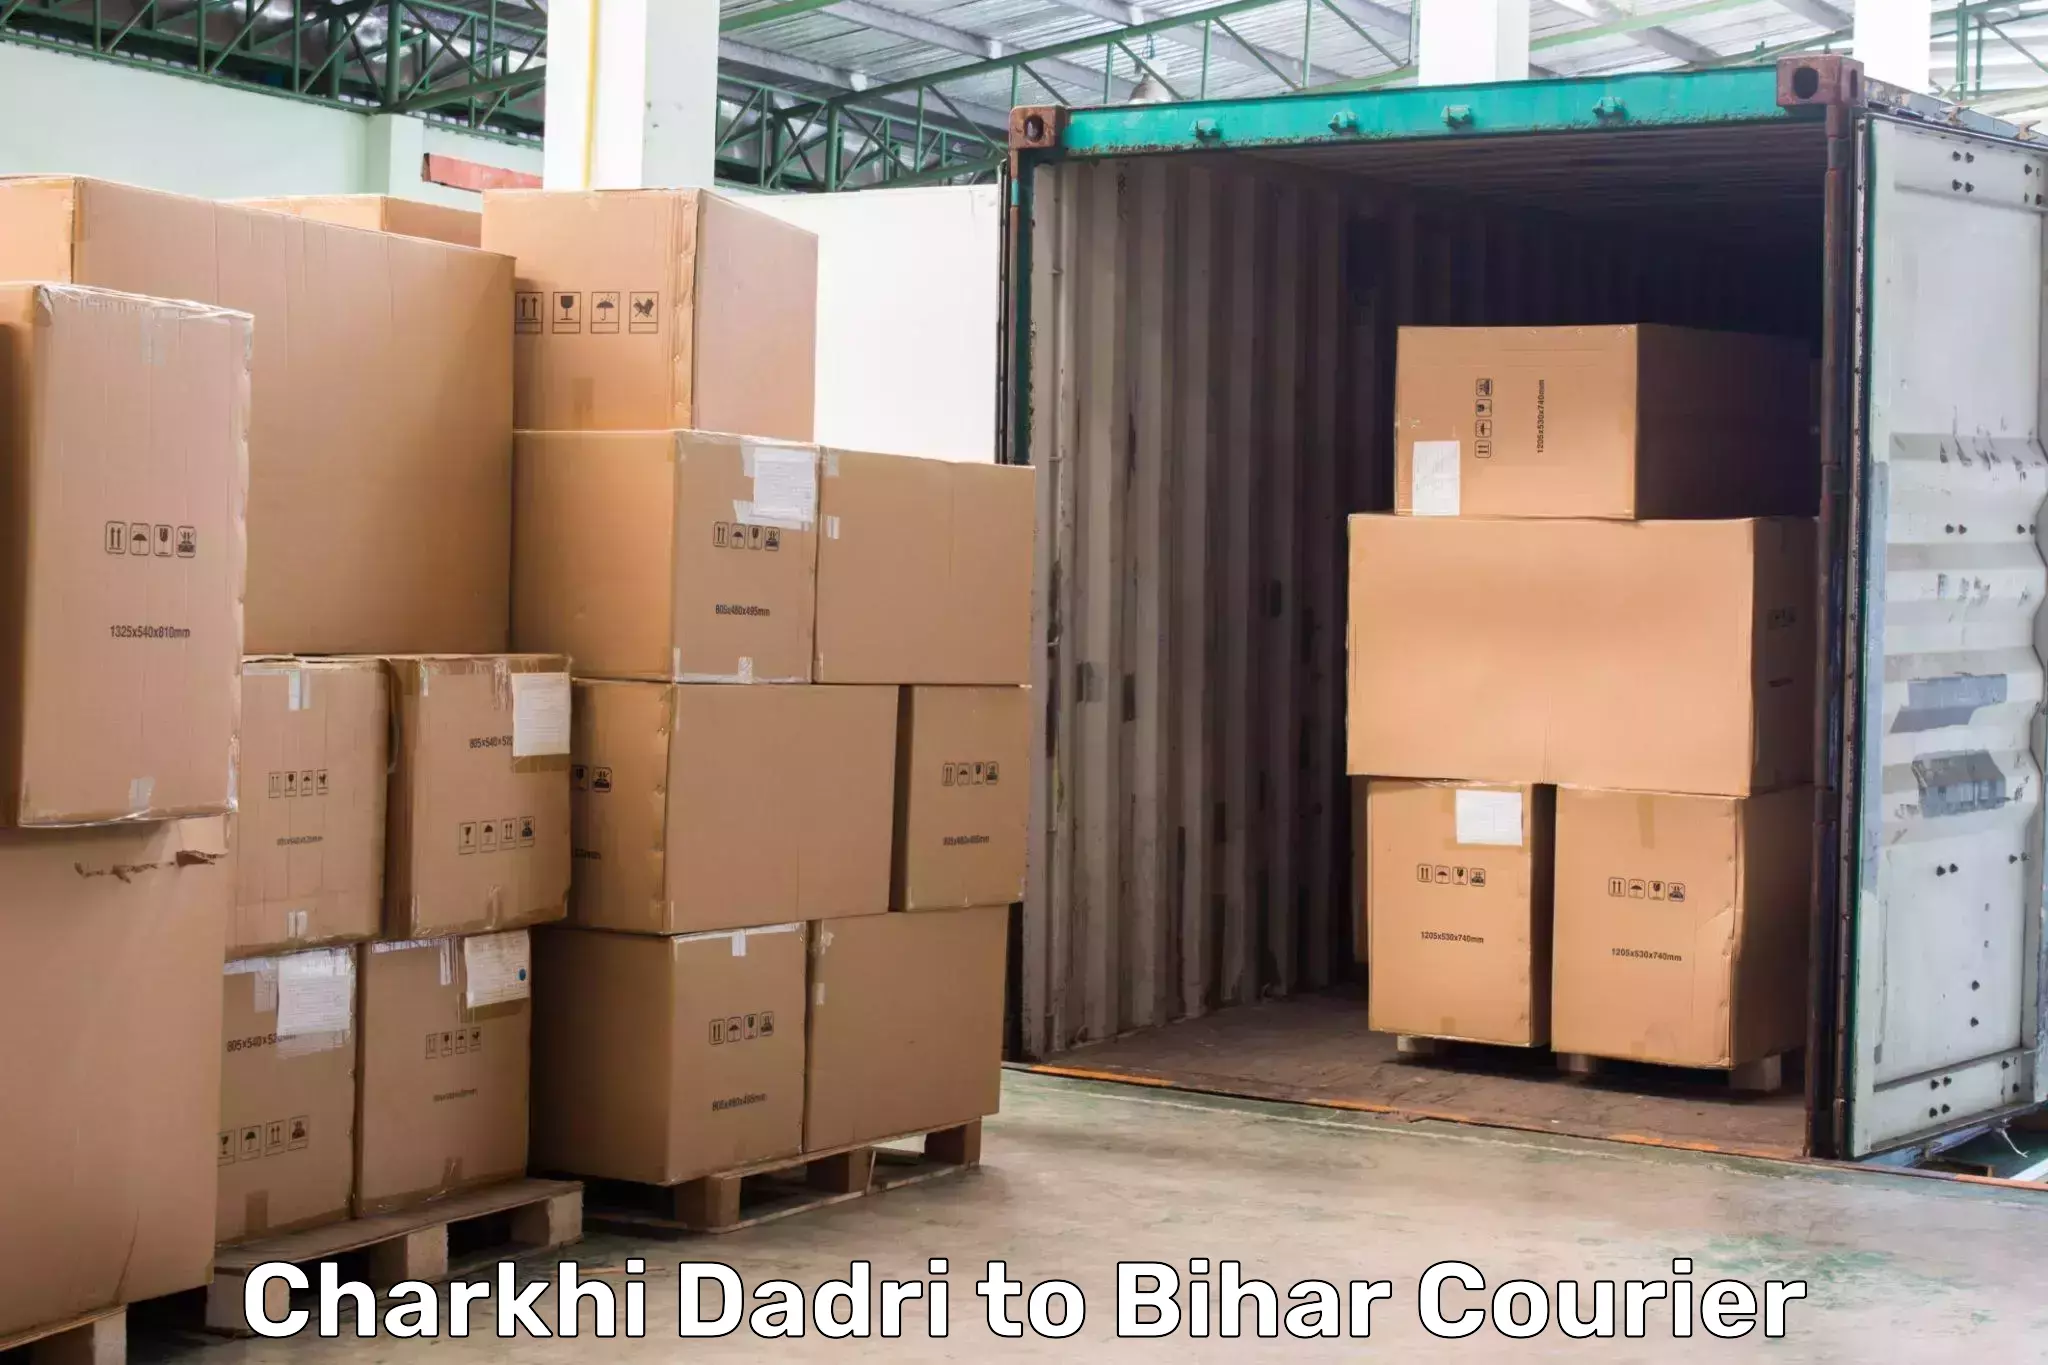 Sustainable shipping practices Charkhi Dadri to Mahnar Bazar